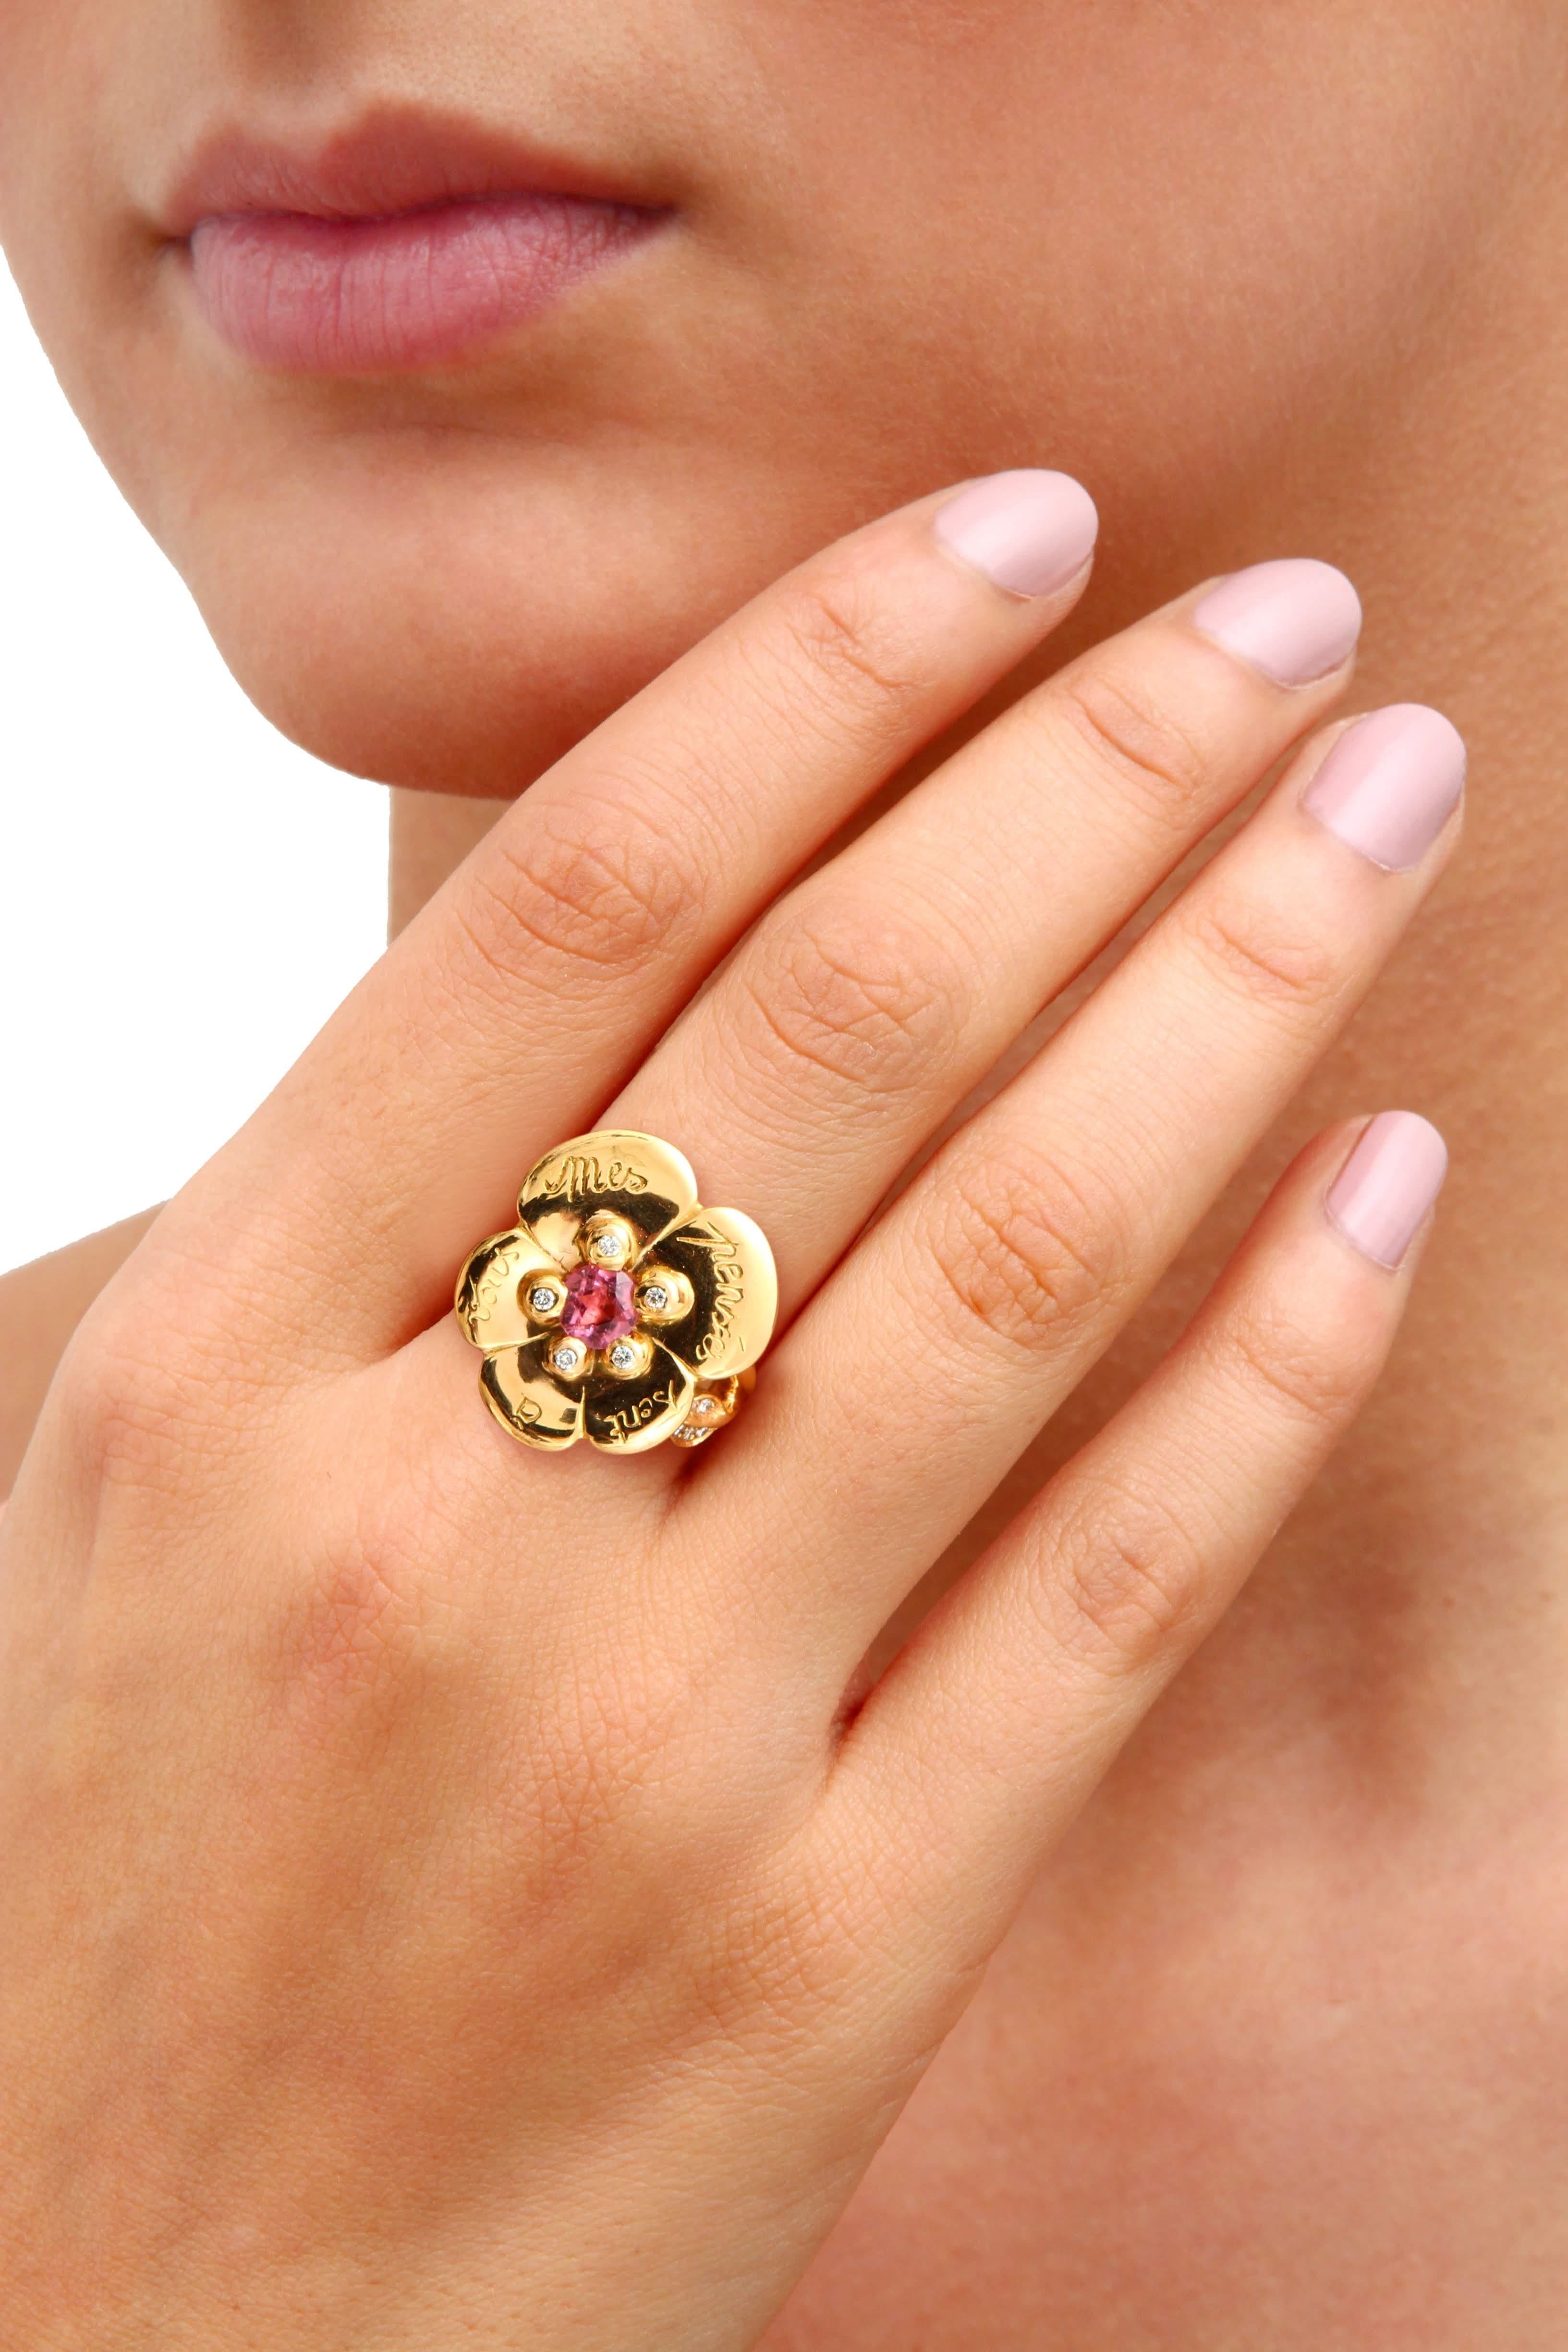 Sylvie Corbelin Limited Edition of an 18K Gold Pansy Ring with Rodholite Garnet For Sale 2